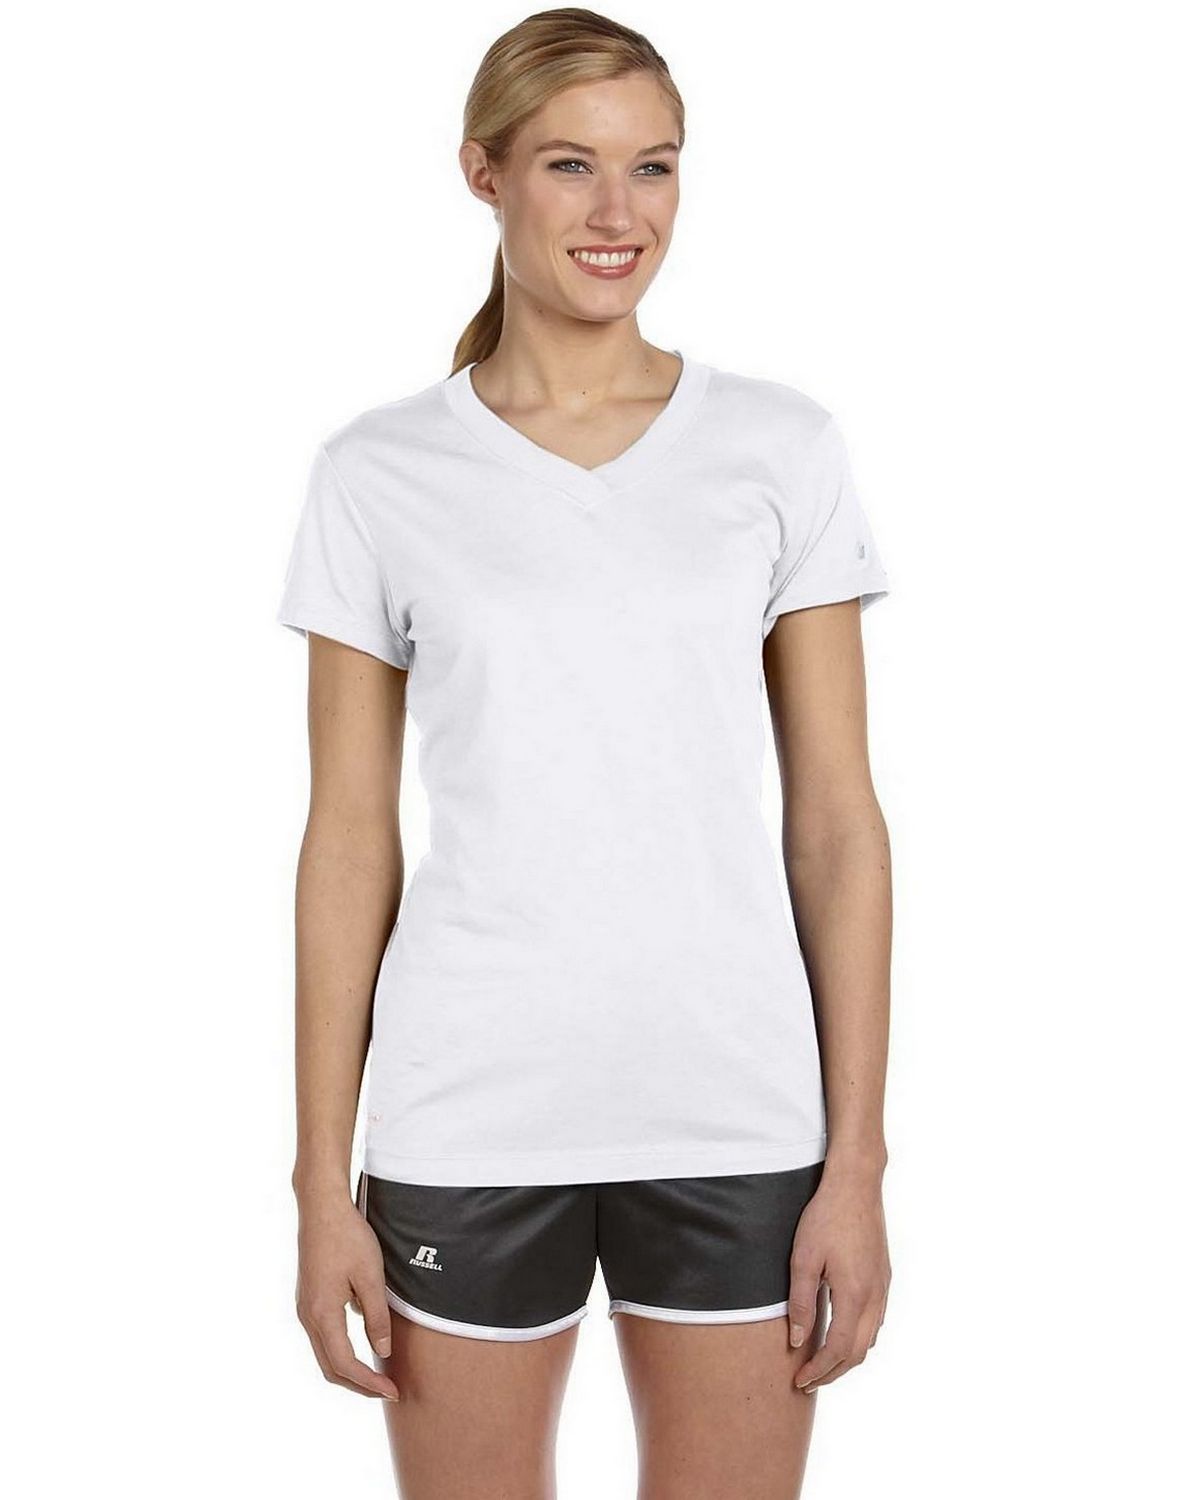 russell athletic women's t shirts